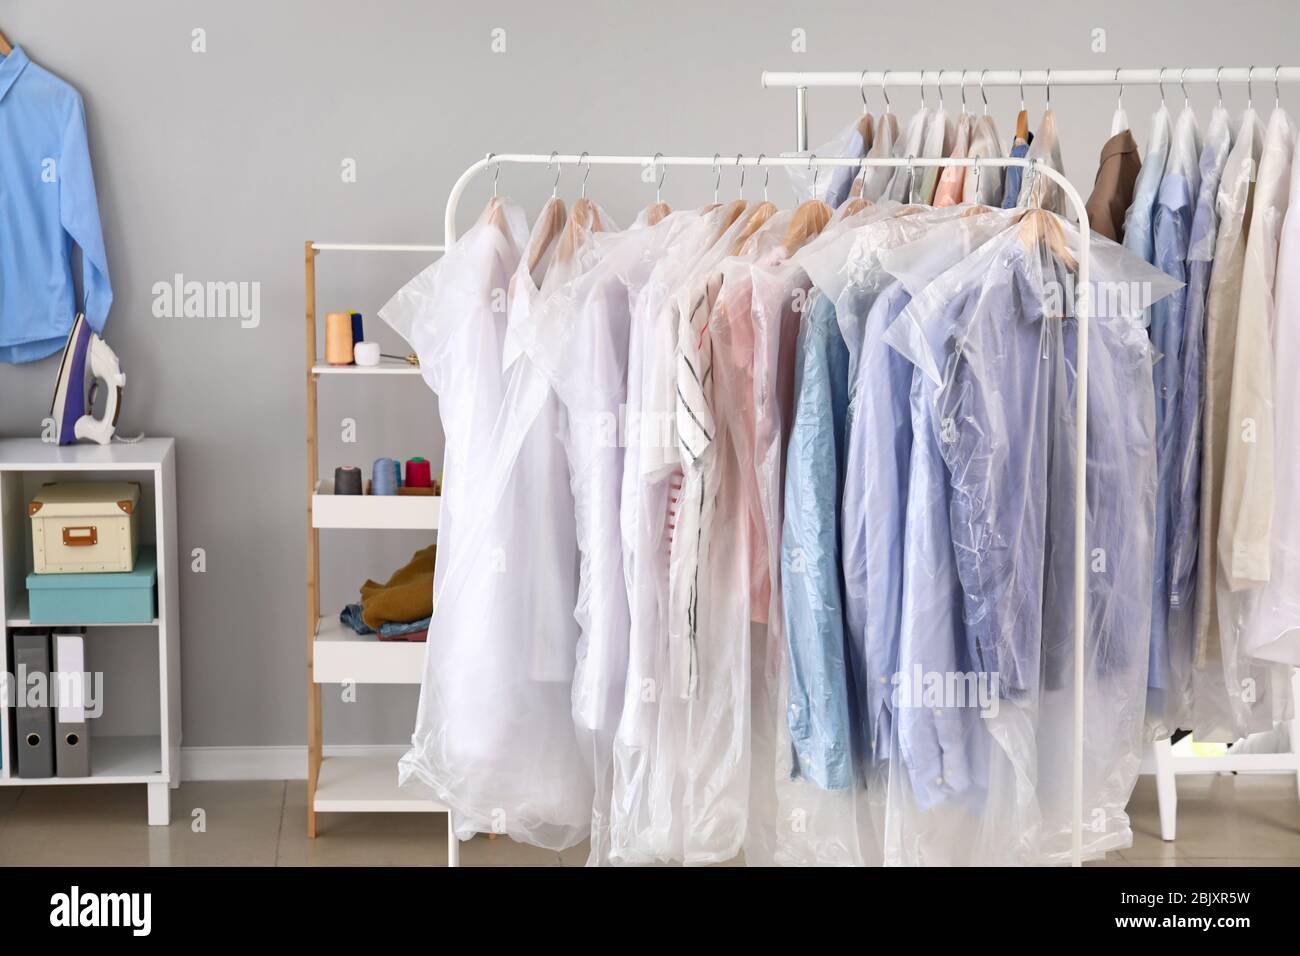 https://c8.alamy.com/comp/2BJXR5W/rack-with-clothes-in-modern-dry-cleaners-2BJXR5W.jpg